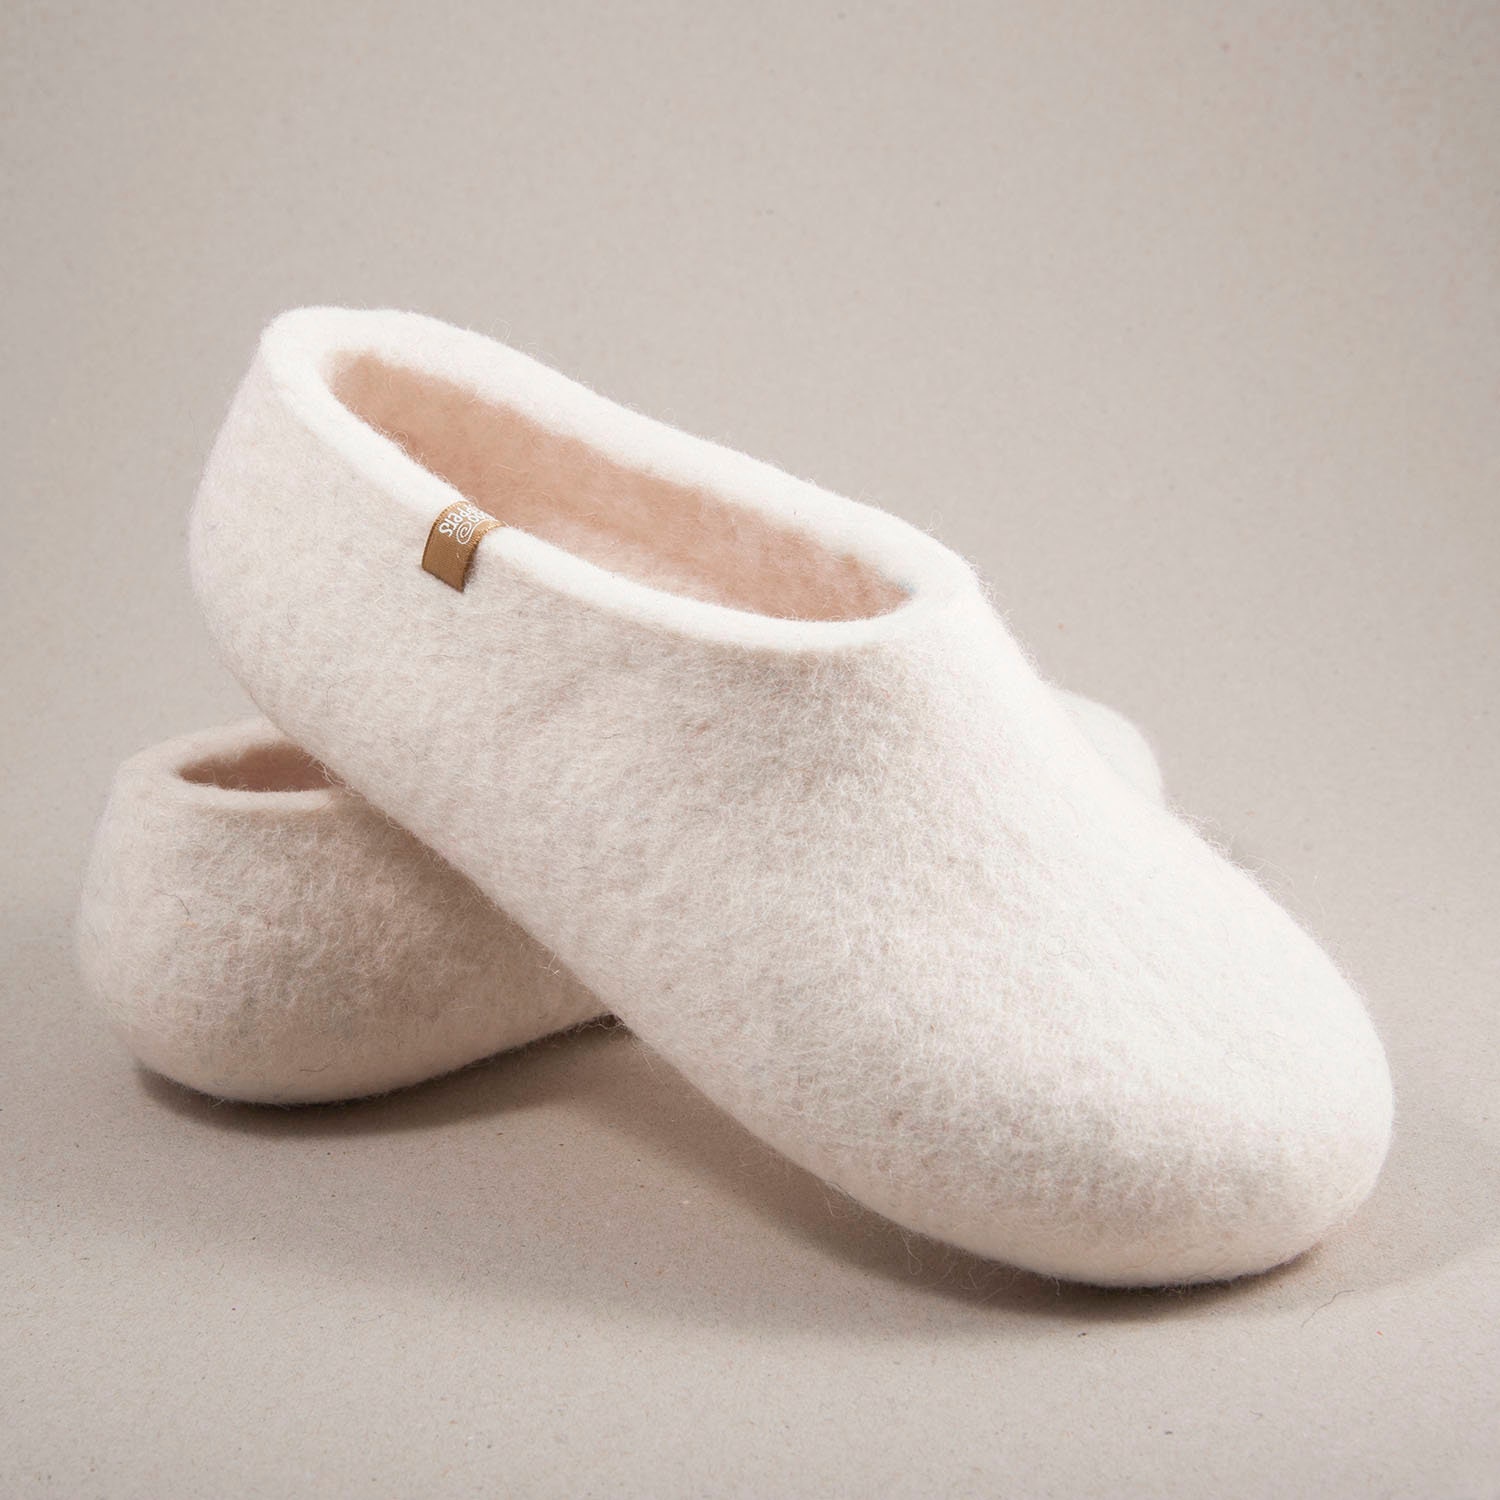 White Felted Slippers For Women, Organic Wool Slippers The Honeymoon, Wedding Or Every Day Use